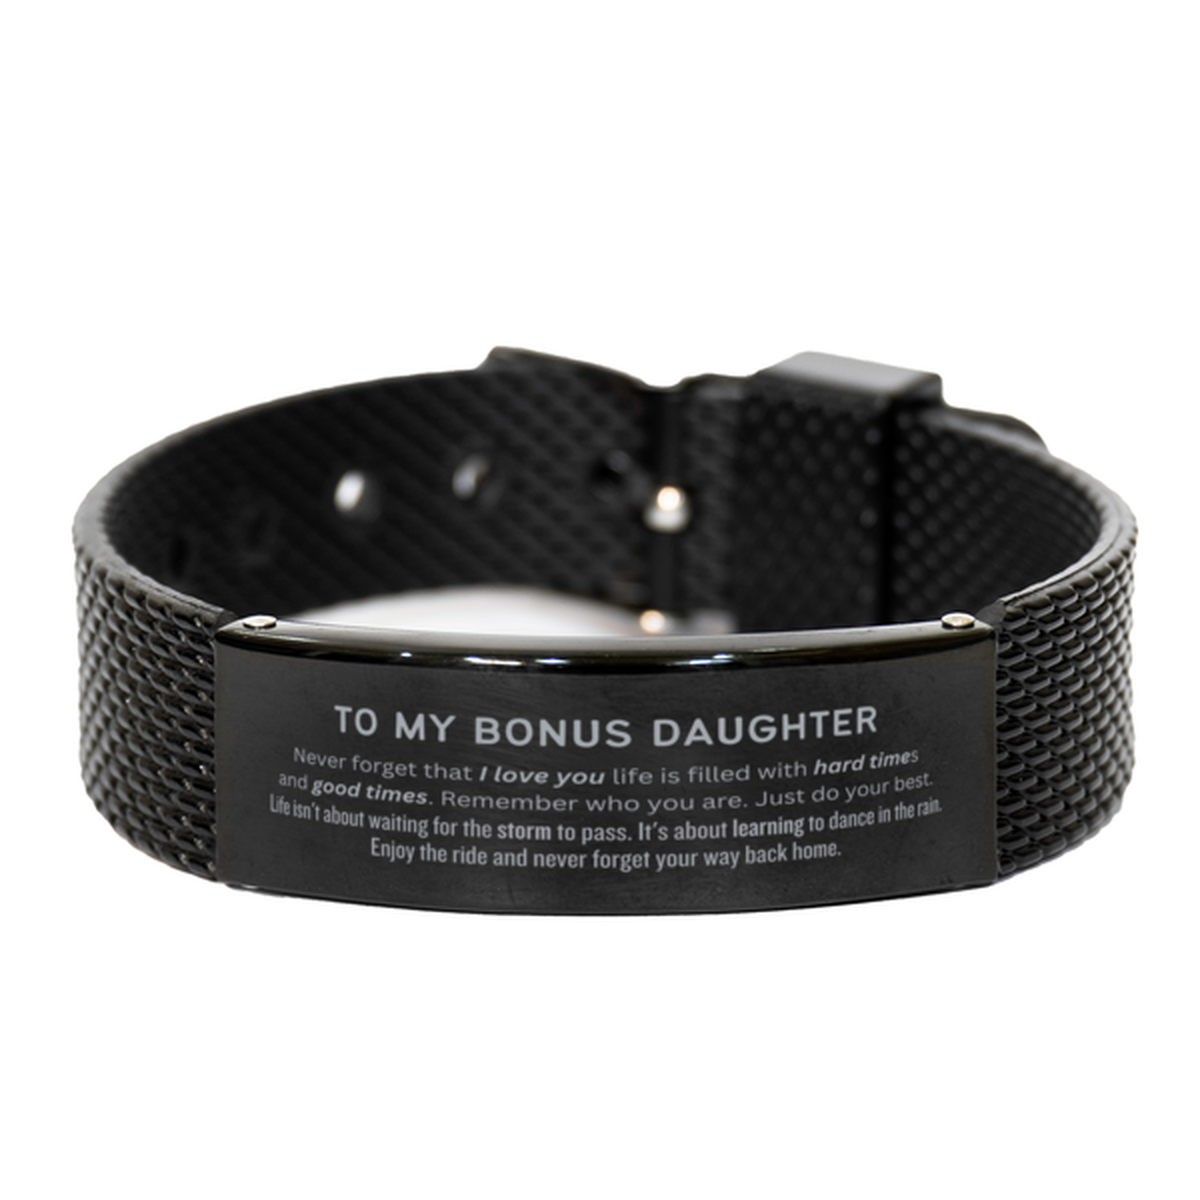 Christmas Bonus Daughter Black Shark Mesh Bracelet Gifts, To My Bonus Daughter Birthday Thank You Gifts For Bonus Daughter, Graduation Unique Gifts For Bonus Daughter To My Bonus Daughter Never forget that I love you life is filled with hard times and goo